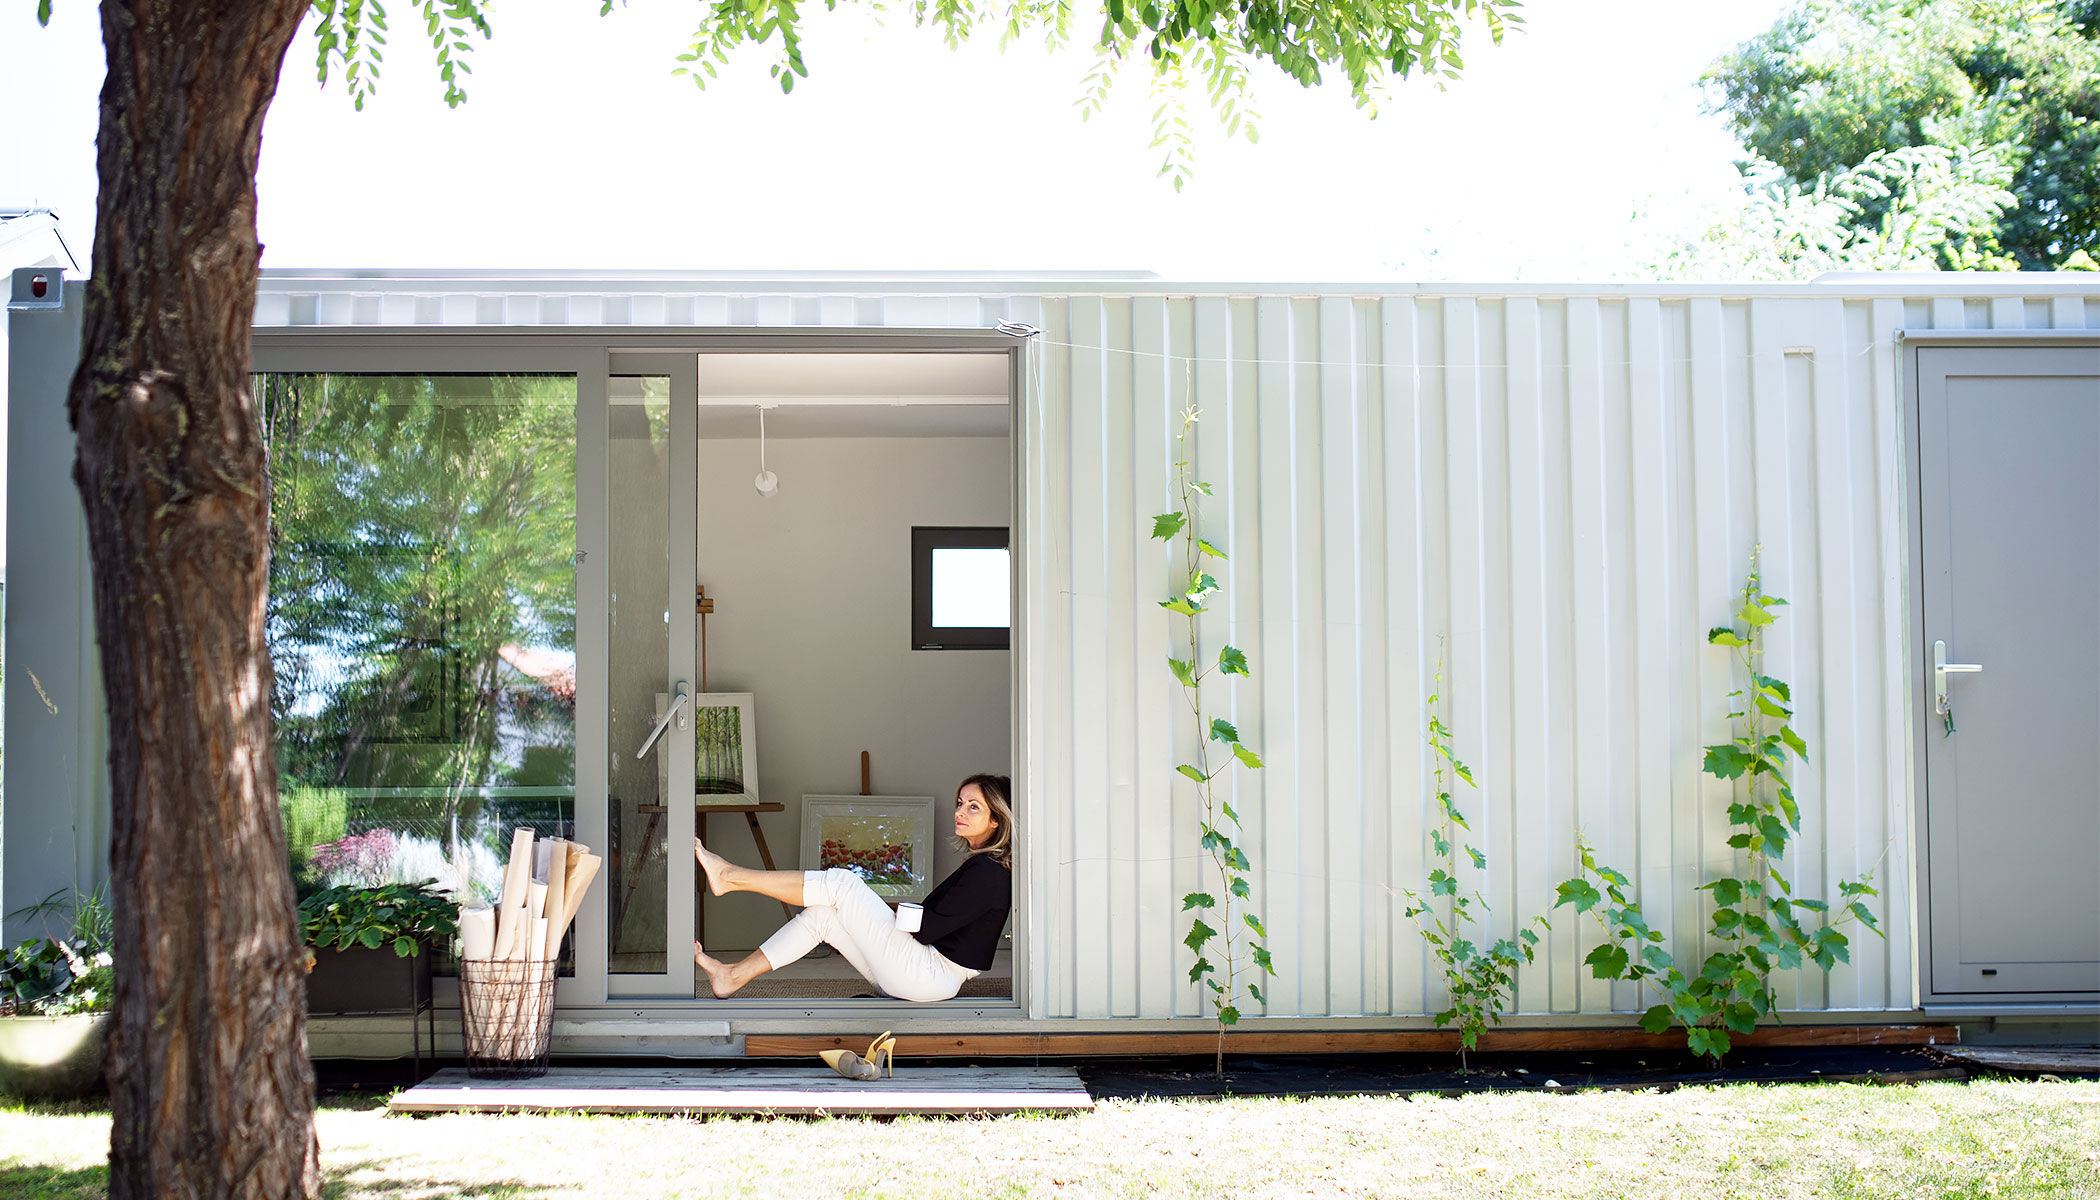 A Shipping Container Home: What Buyers Should Know